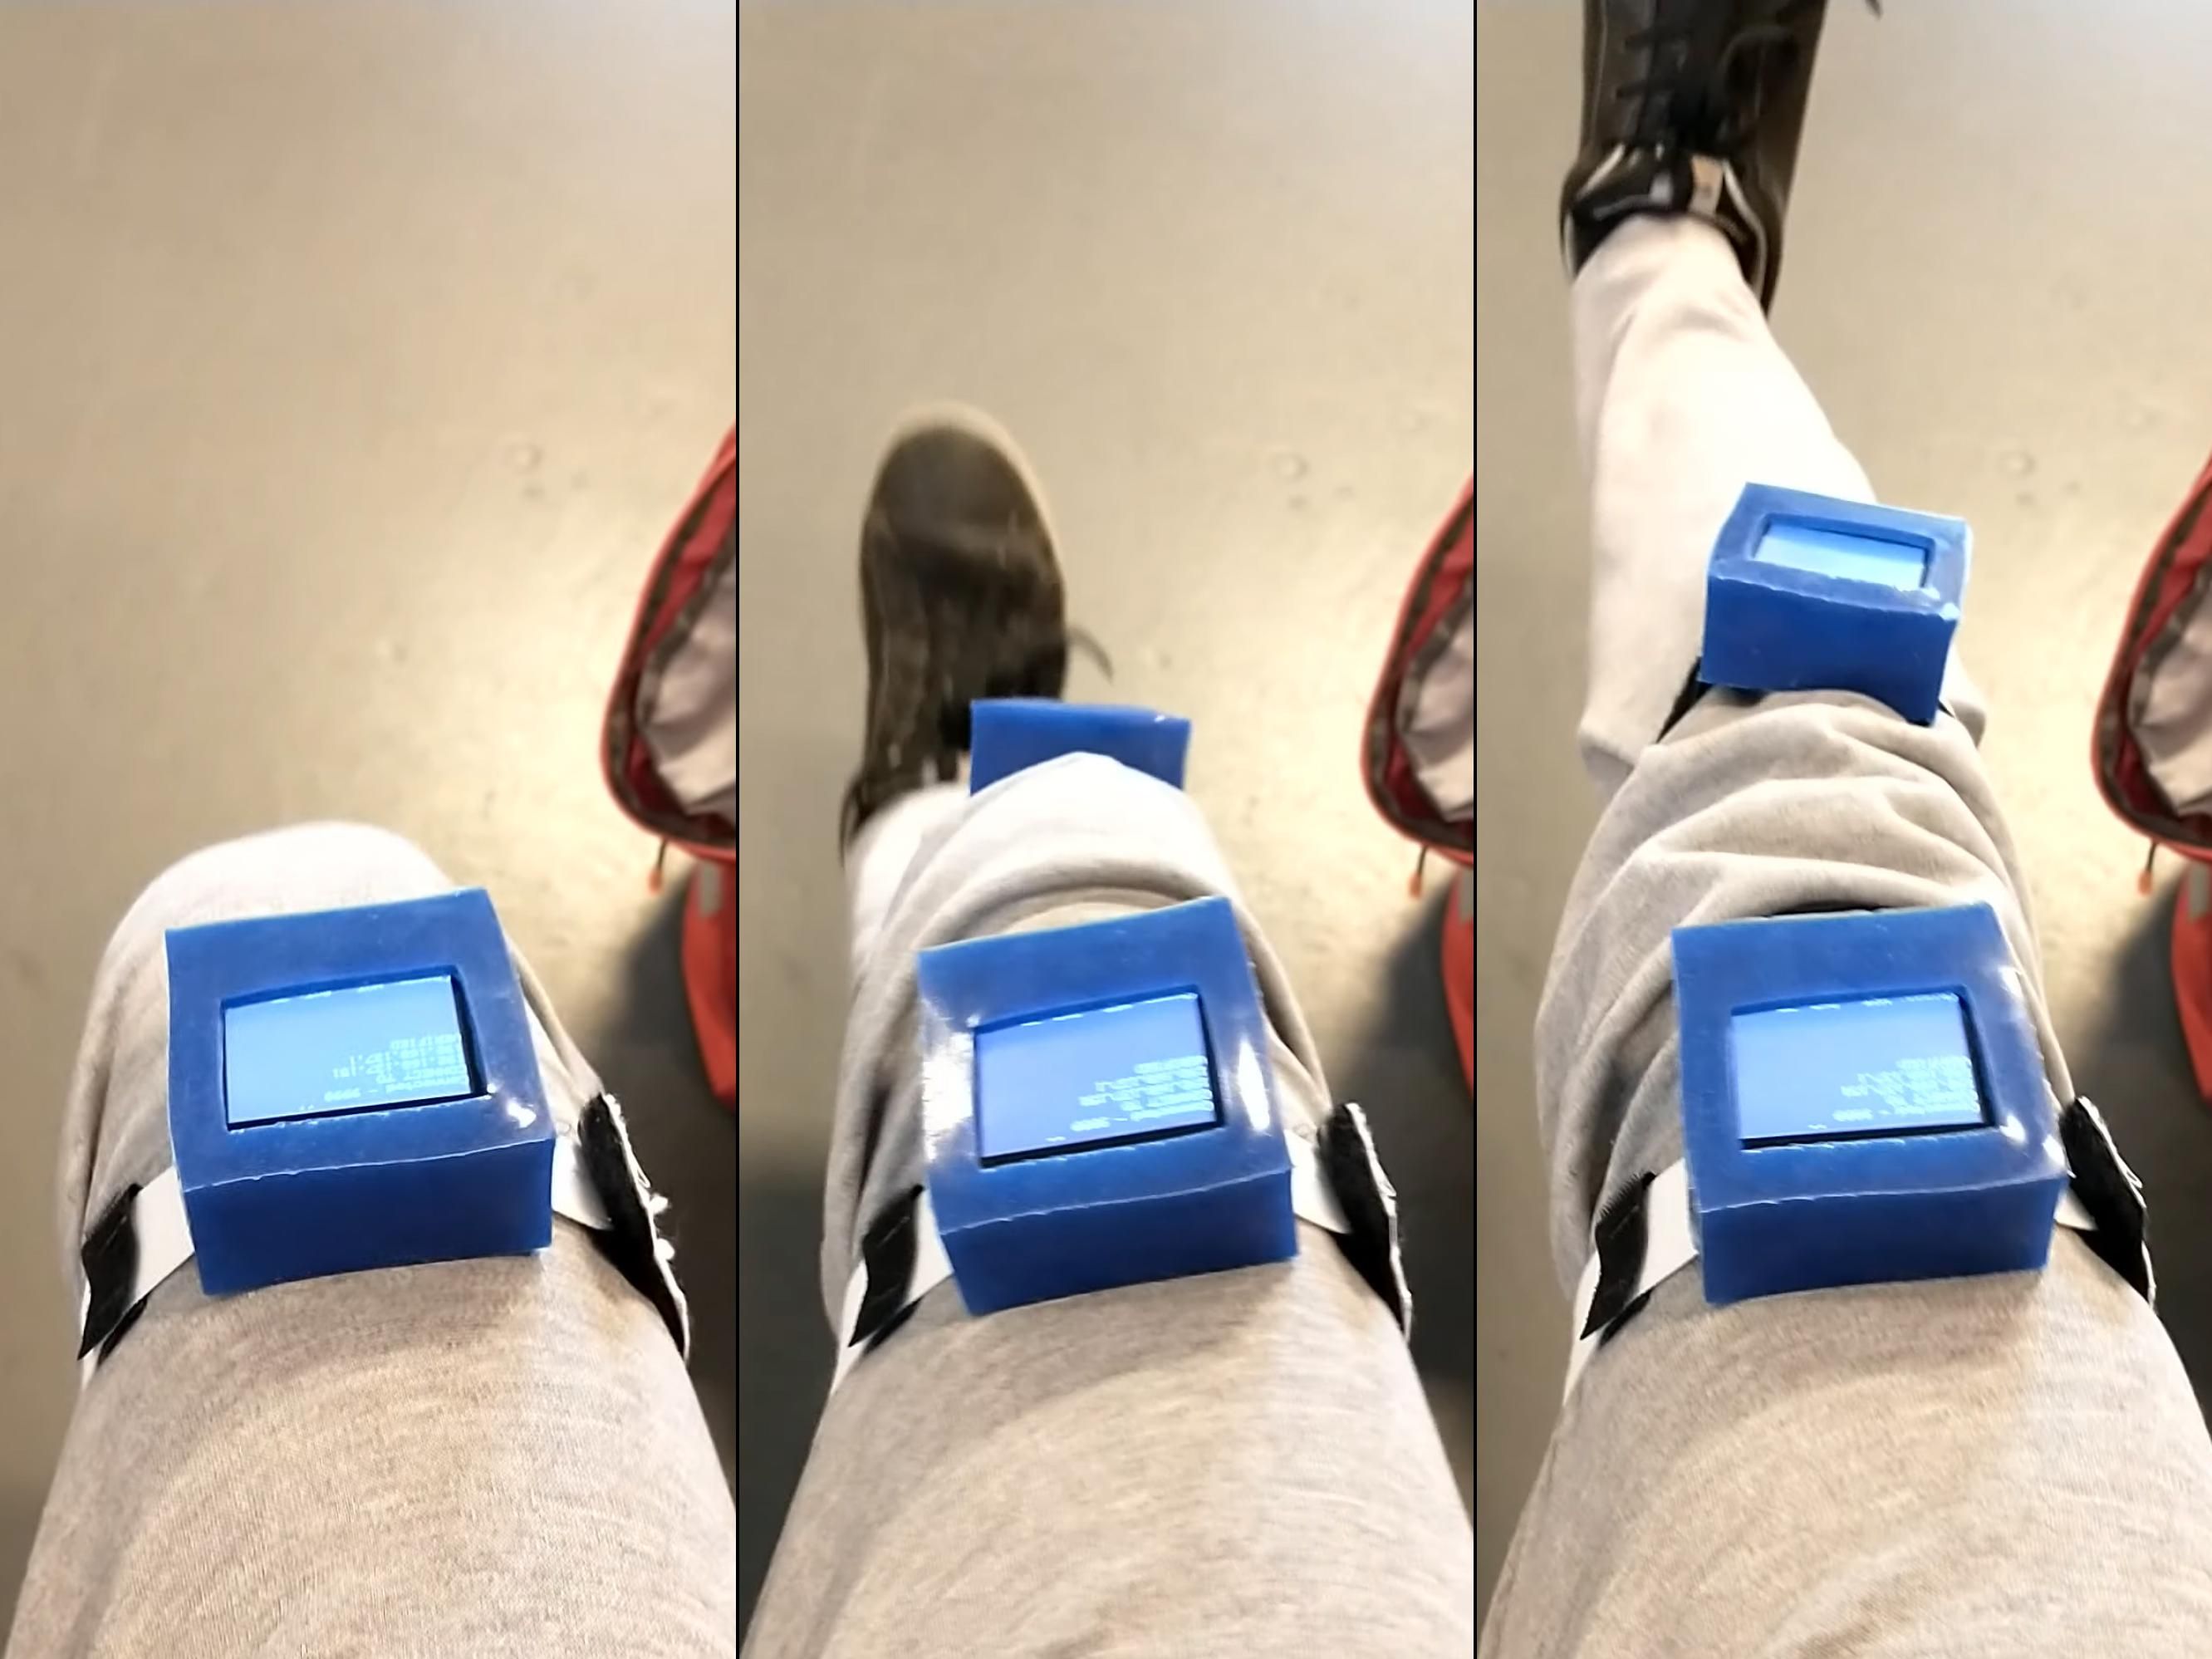 3 images showing blue box contraptions on a leg. The leg starts bent, and then is shown half and fully straightened.